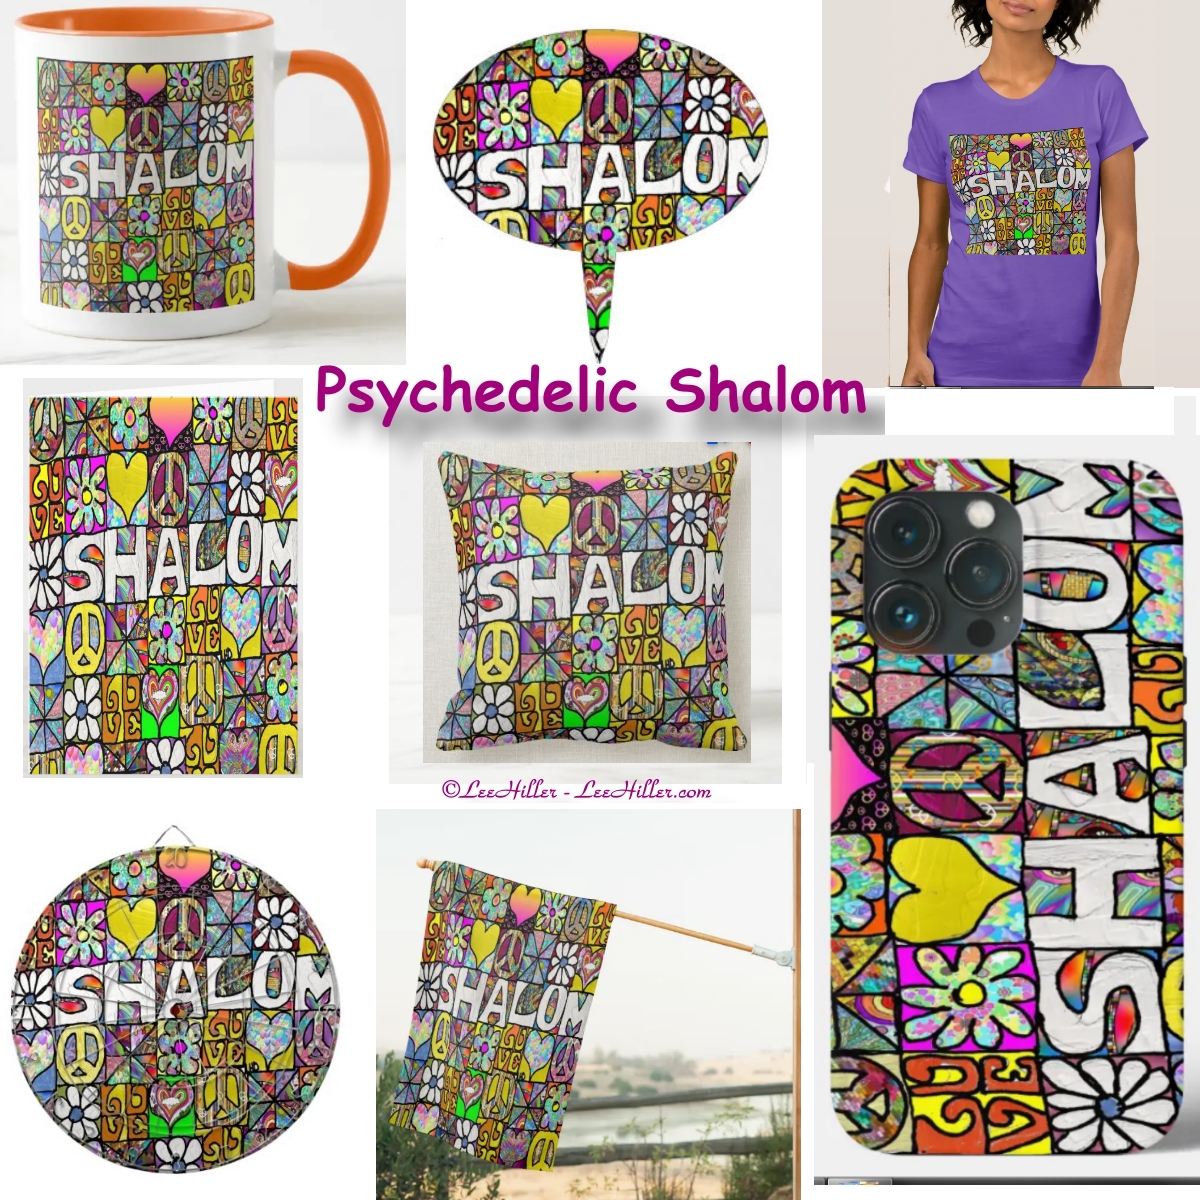 🌸✌️☮🌼❤️💮🌸✌️☮🌼❤️💮 Retro 60s #Psychedelic #Shalom #Ar #Retro #Peace#love #hope #shoppingonline #giftideas #gifts #onlineshopping zazzle.com/collections/re…